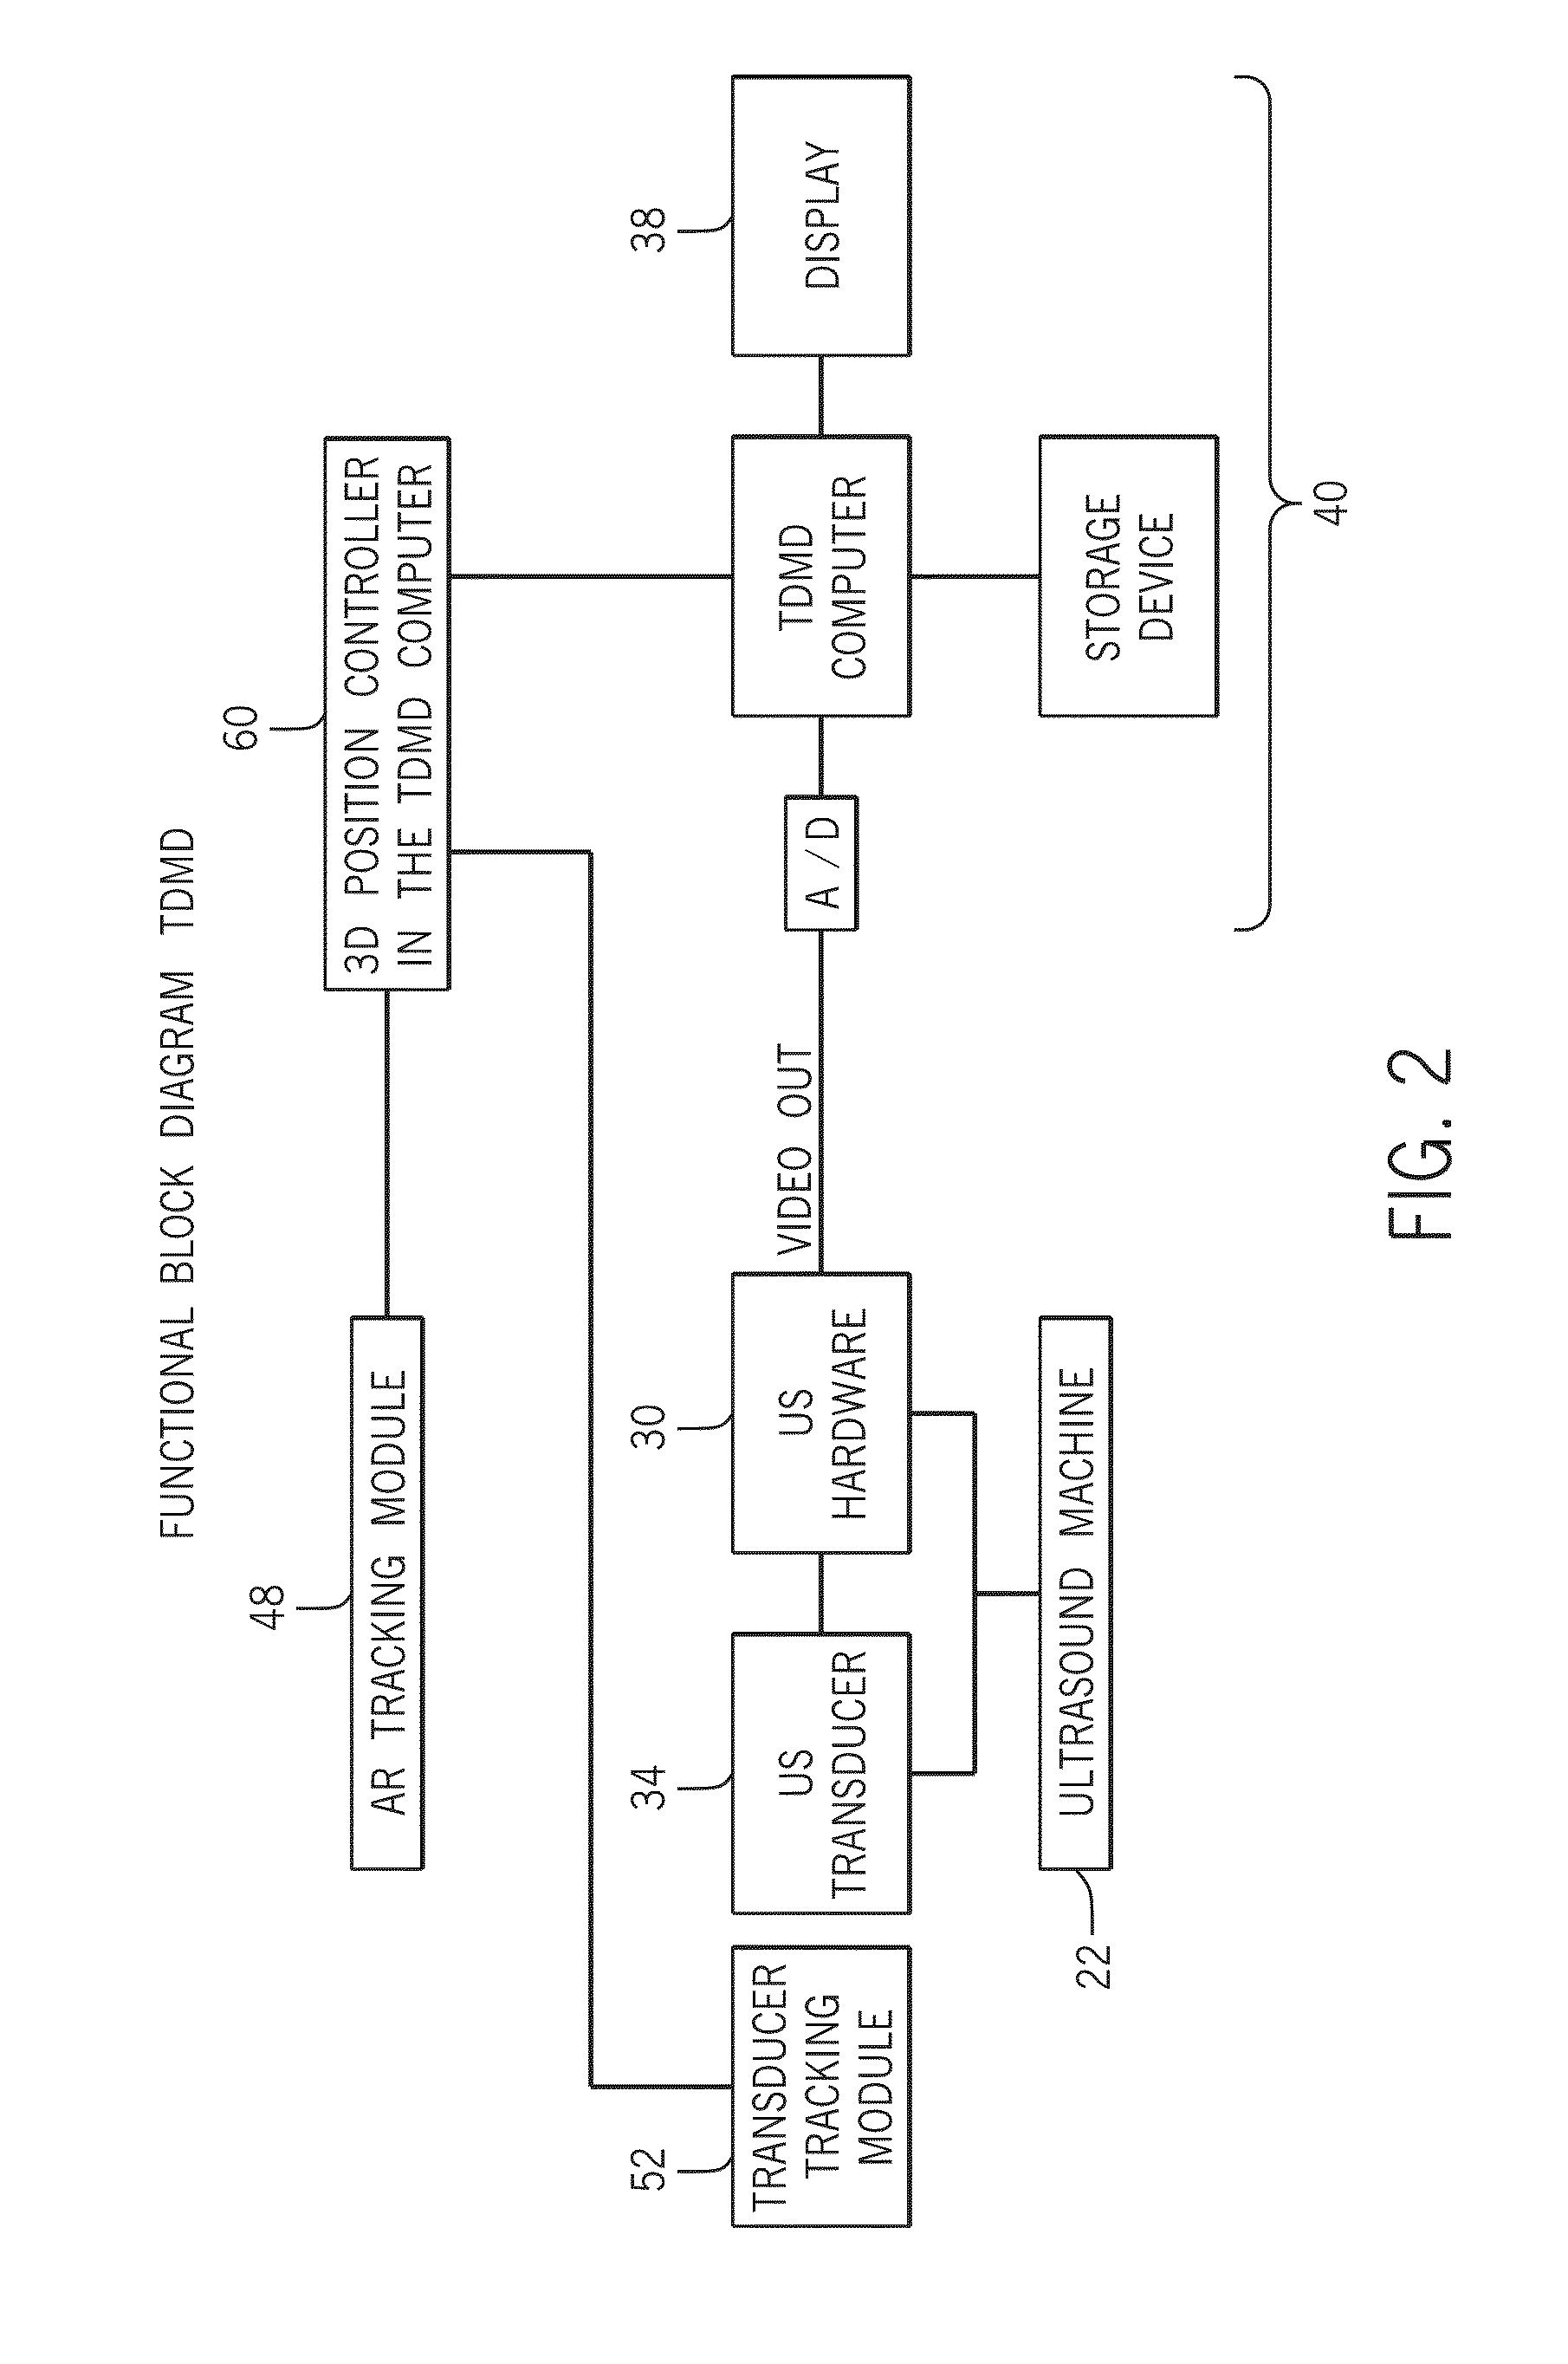 Three Dimensional Mapping Display System for Diagnostic Ultrasound Machines